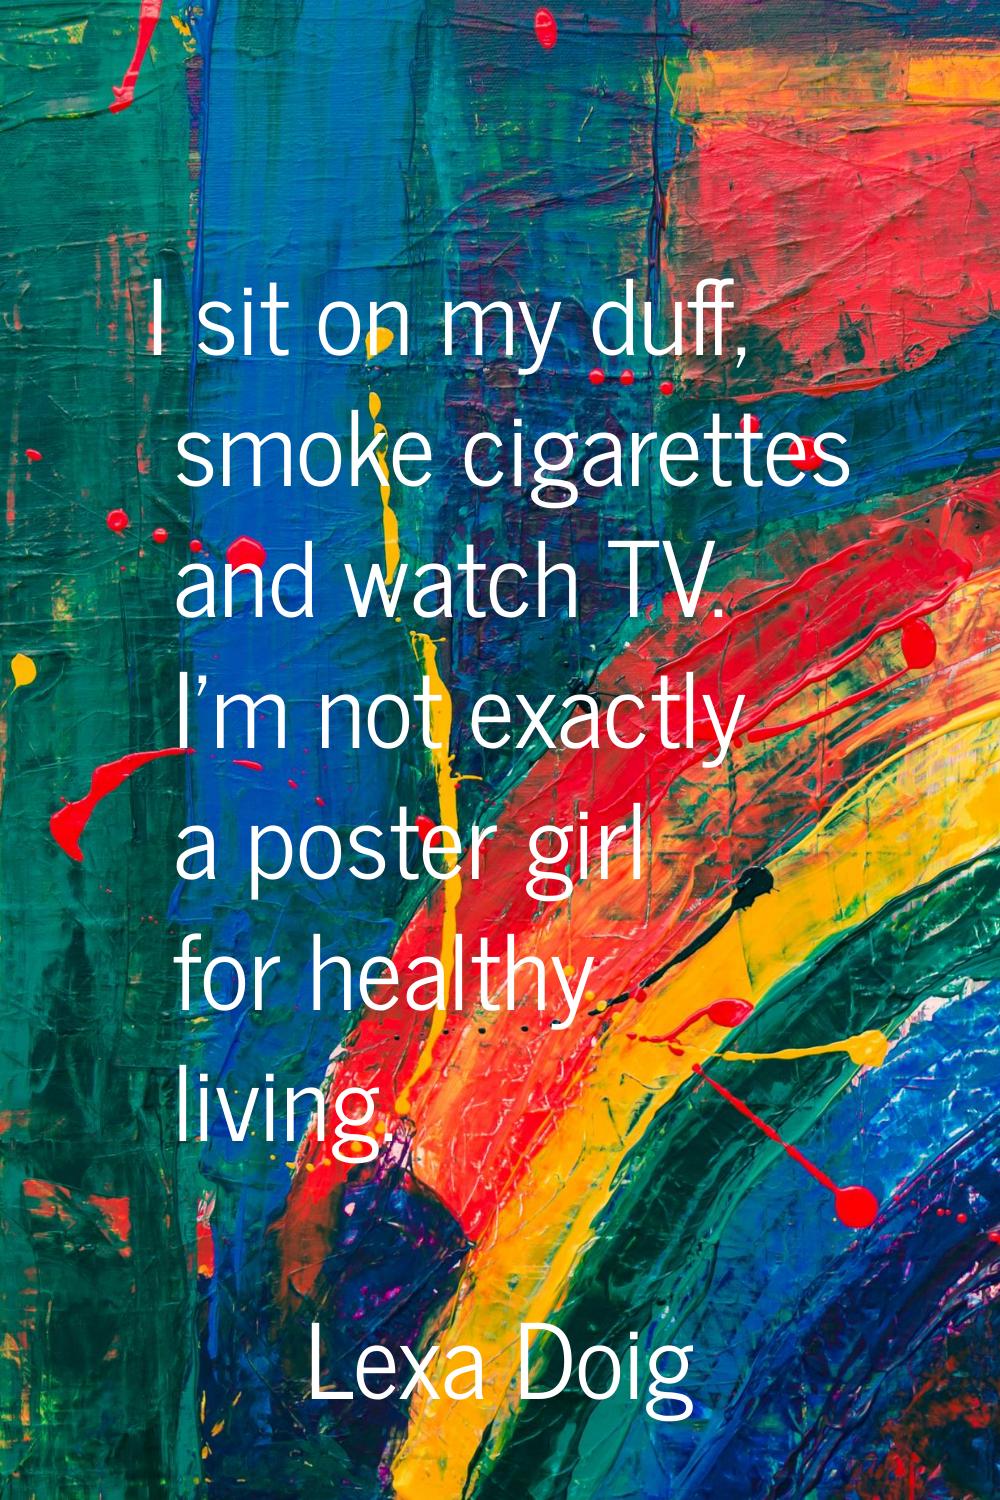 I sit on my duff, smoke cigarettes and watch TV. I'm not exactly a poster girl for healthy living.